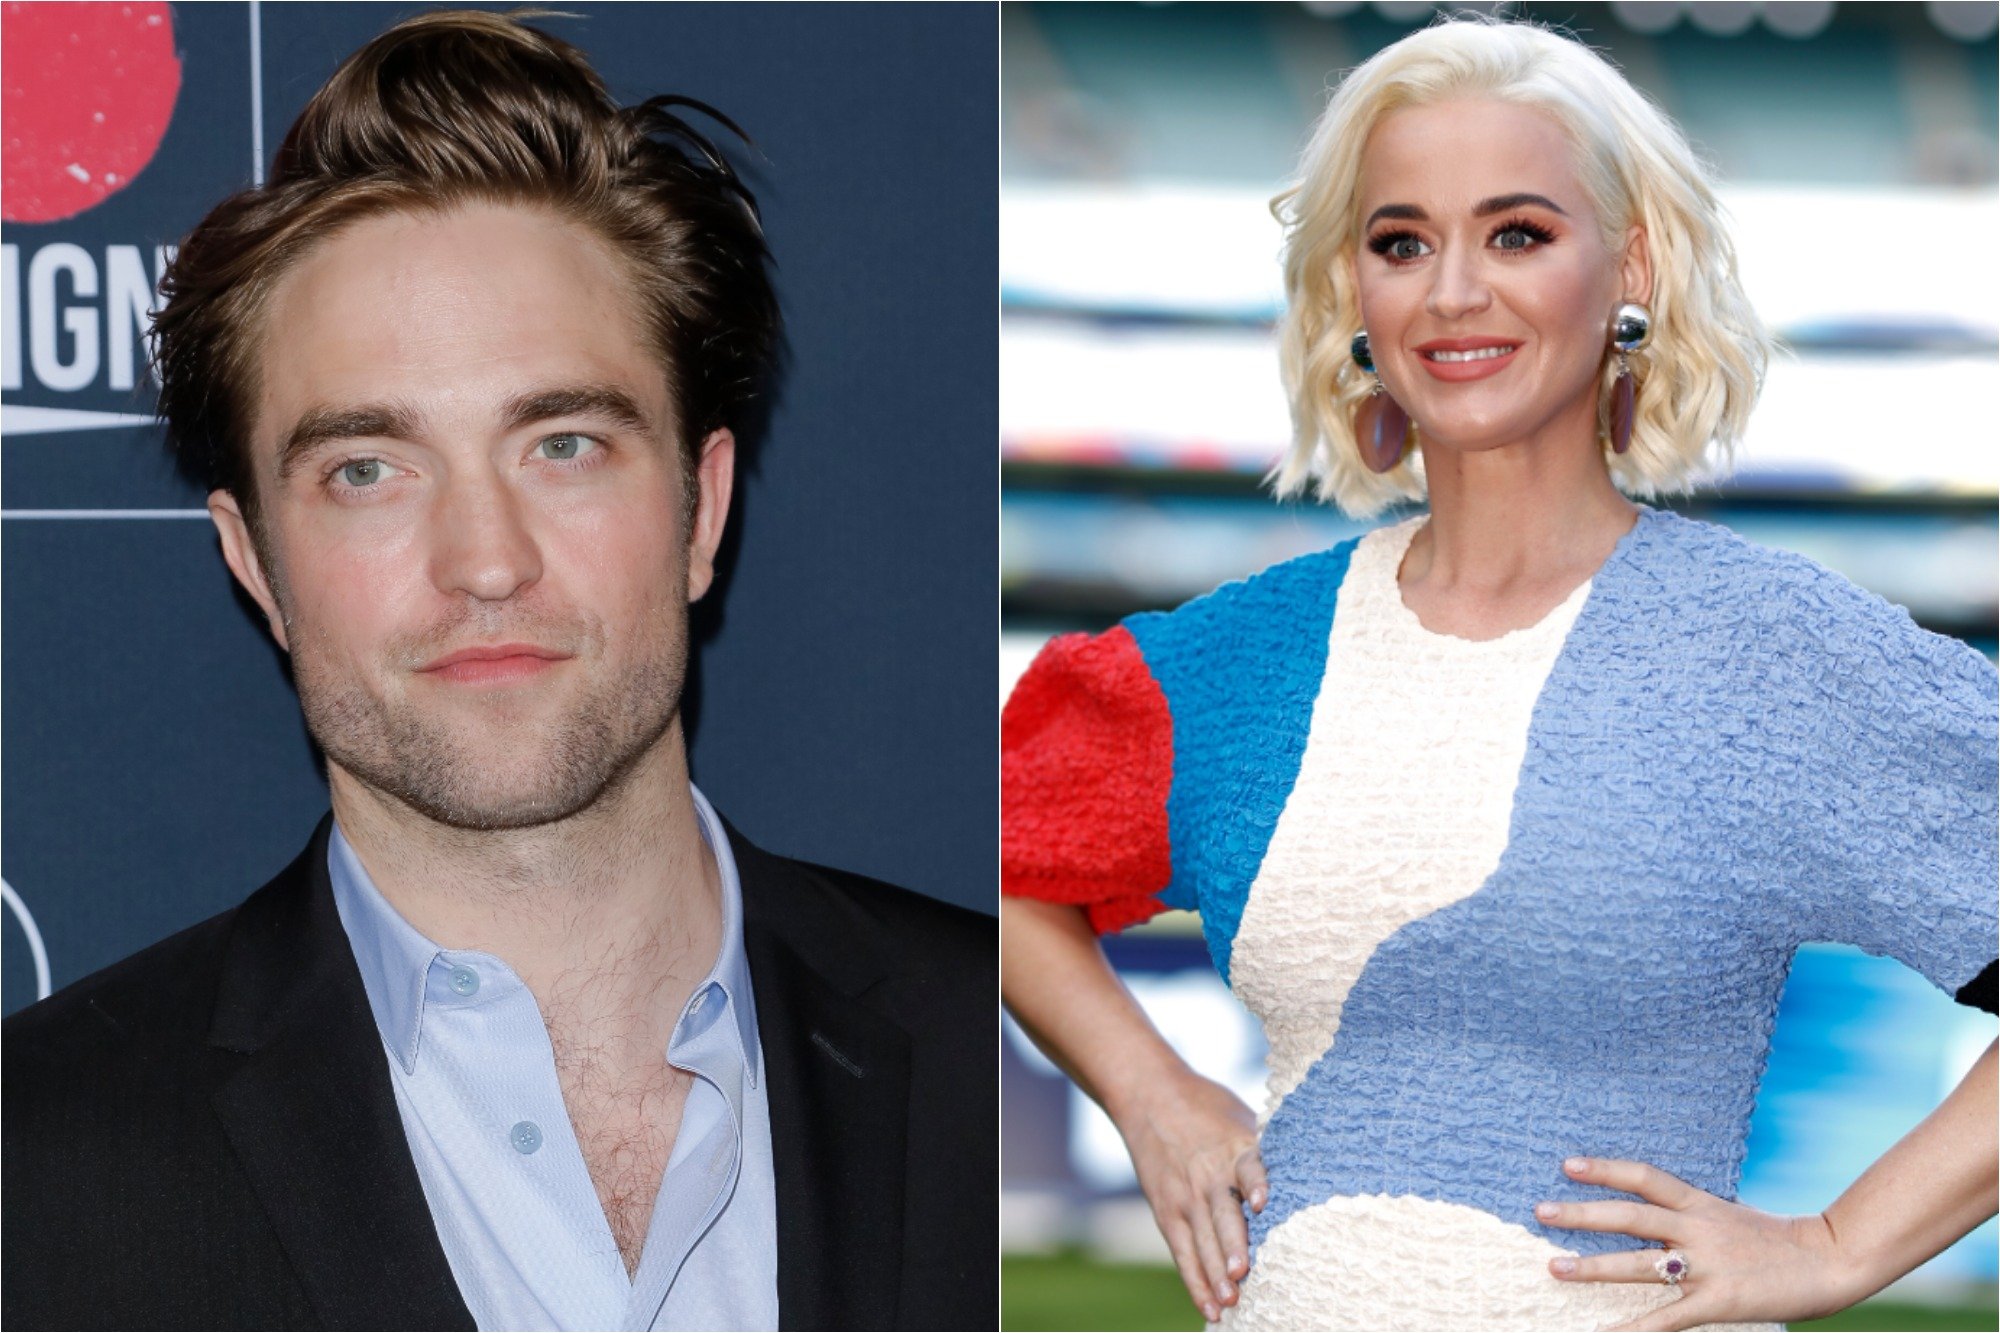 (L) Robert Pattinson at the Go Campaign's 13th Annual Go Gala at NeueHouse Hollywood on Nov. 16, 2019 / (R) Katy Perry at the 2020 ICC Women's T20 World Cup Media Opportunity at Melbourne Cricket Ground on March 07, 2020.